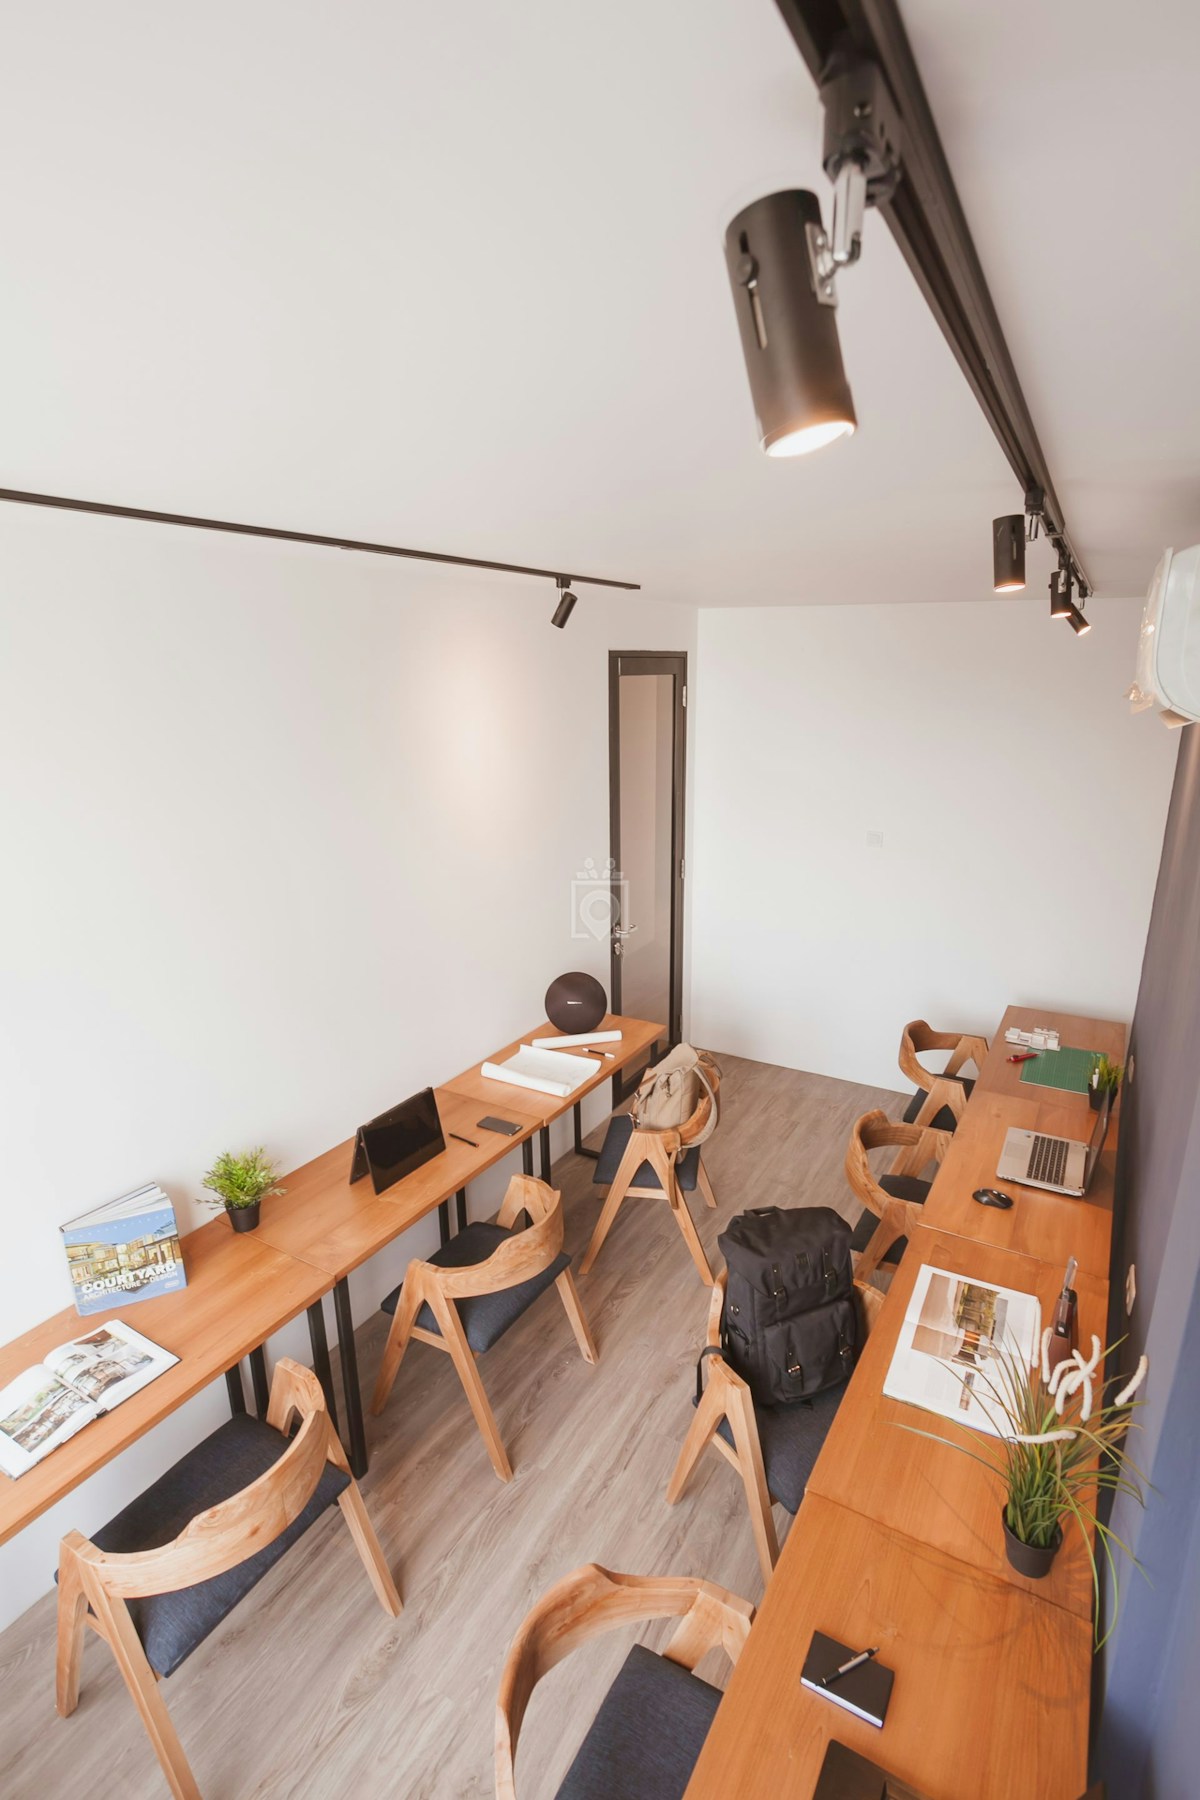 Coworking Space On Golden Hour Coworking Cafe Jakarta - Book Online - Coworker